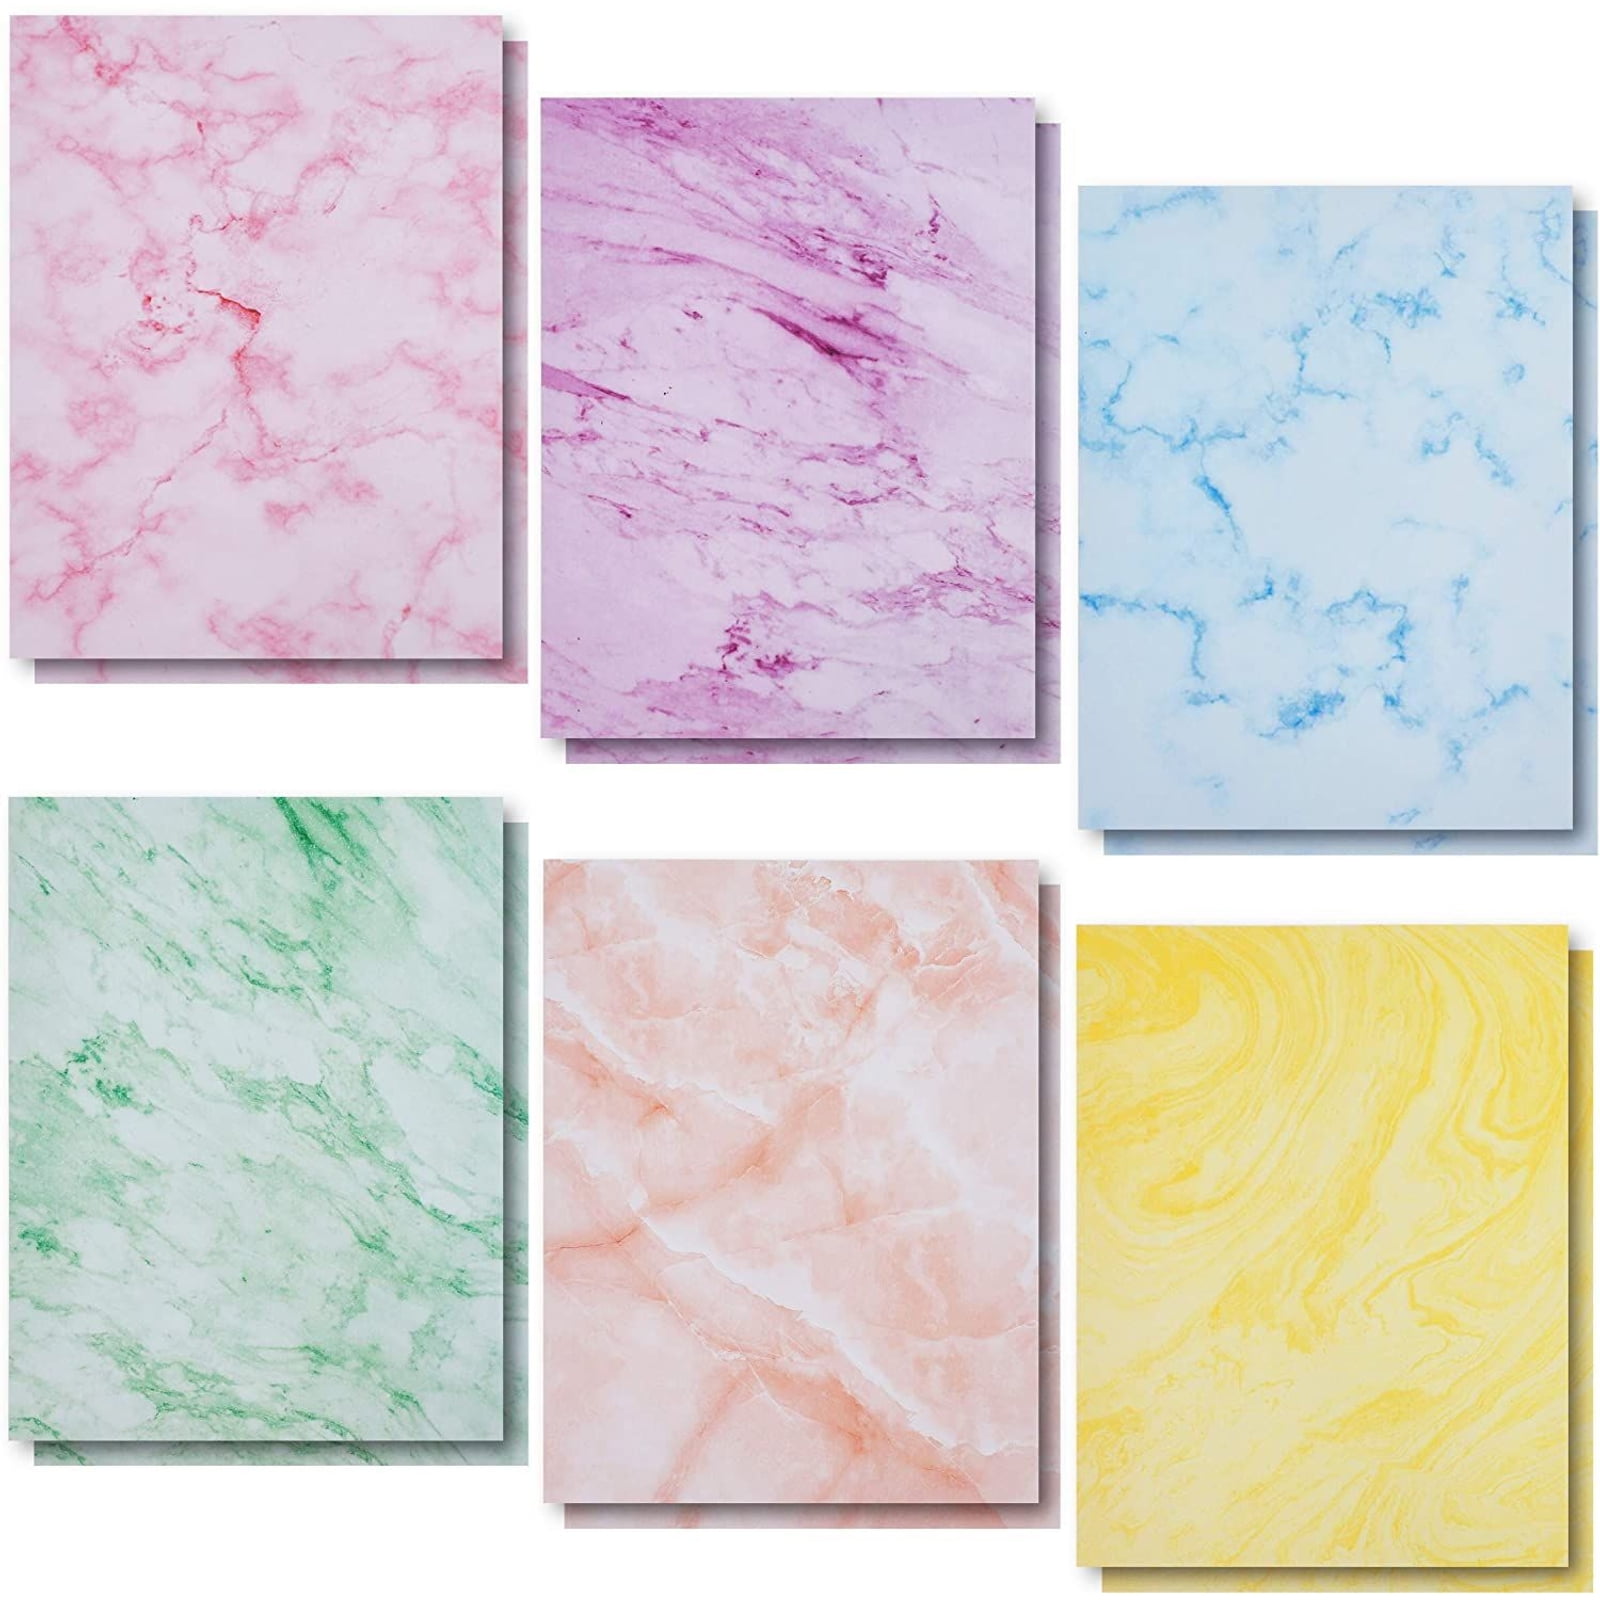 Double Details about   96 Pack Marble Stationery Paper Letterhead Decorative Design Paper 